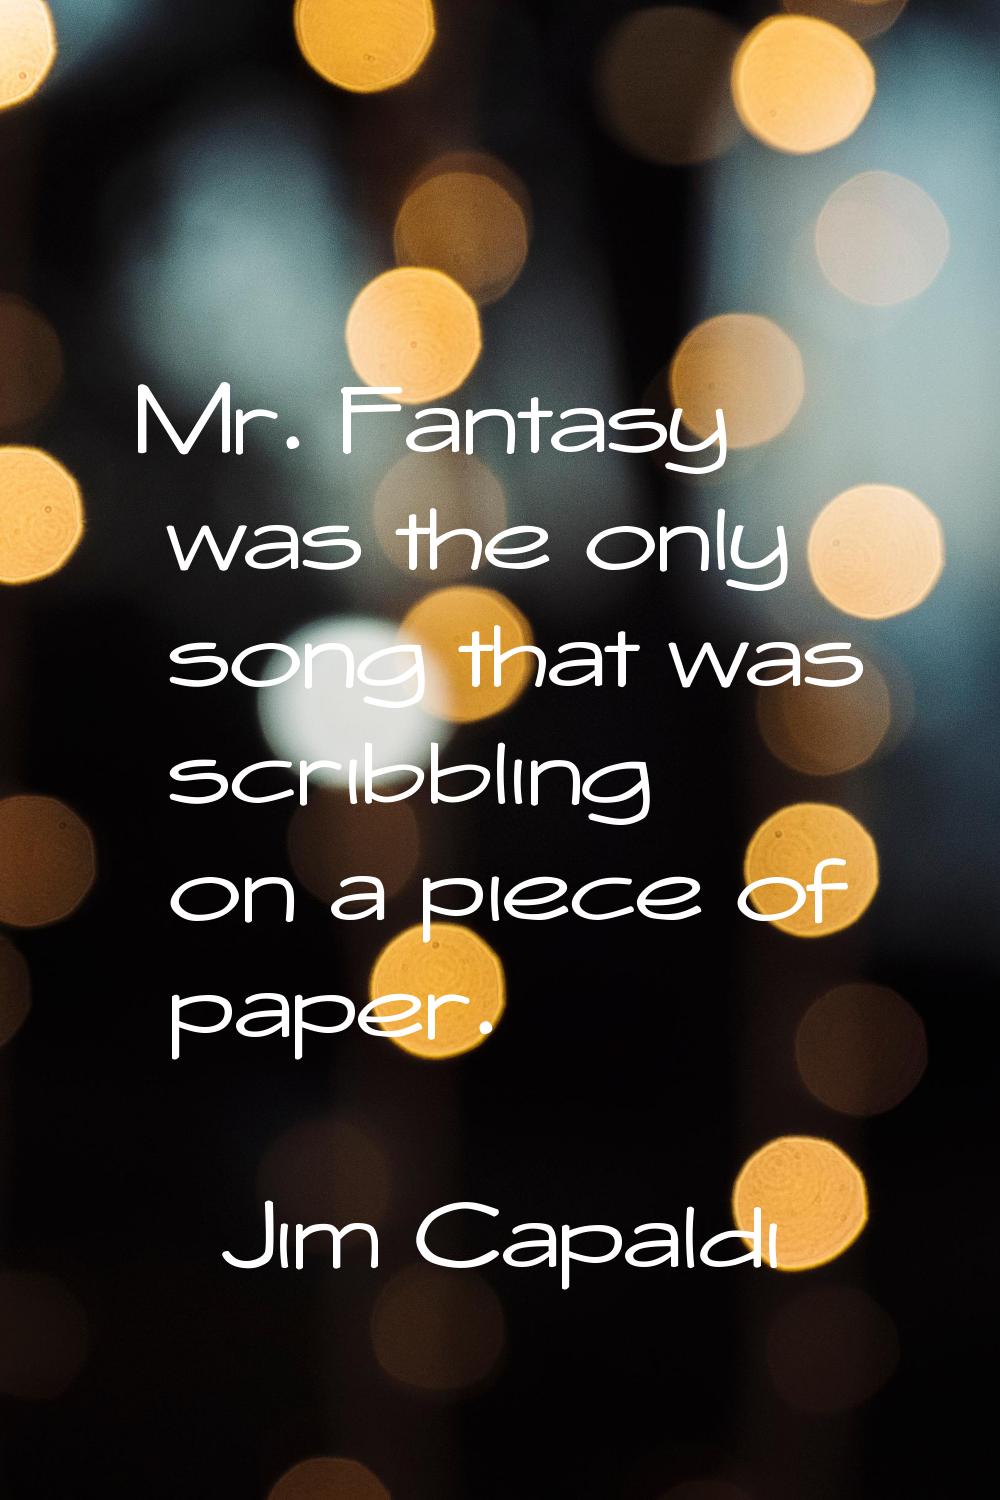 Mr. Fantasy was the only song that was scribbling on a piece of paper.